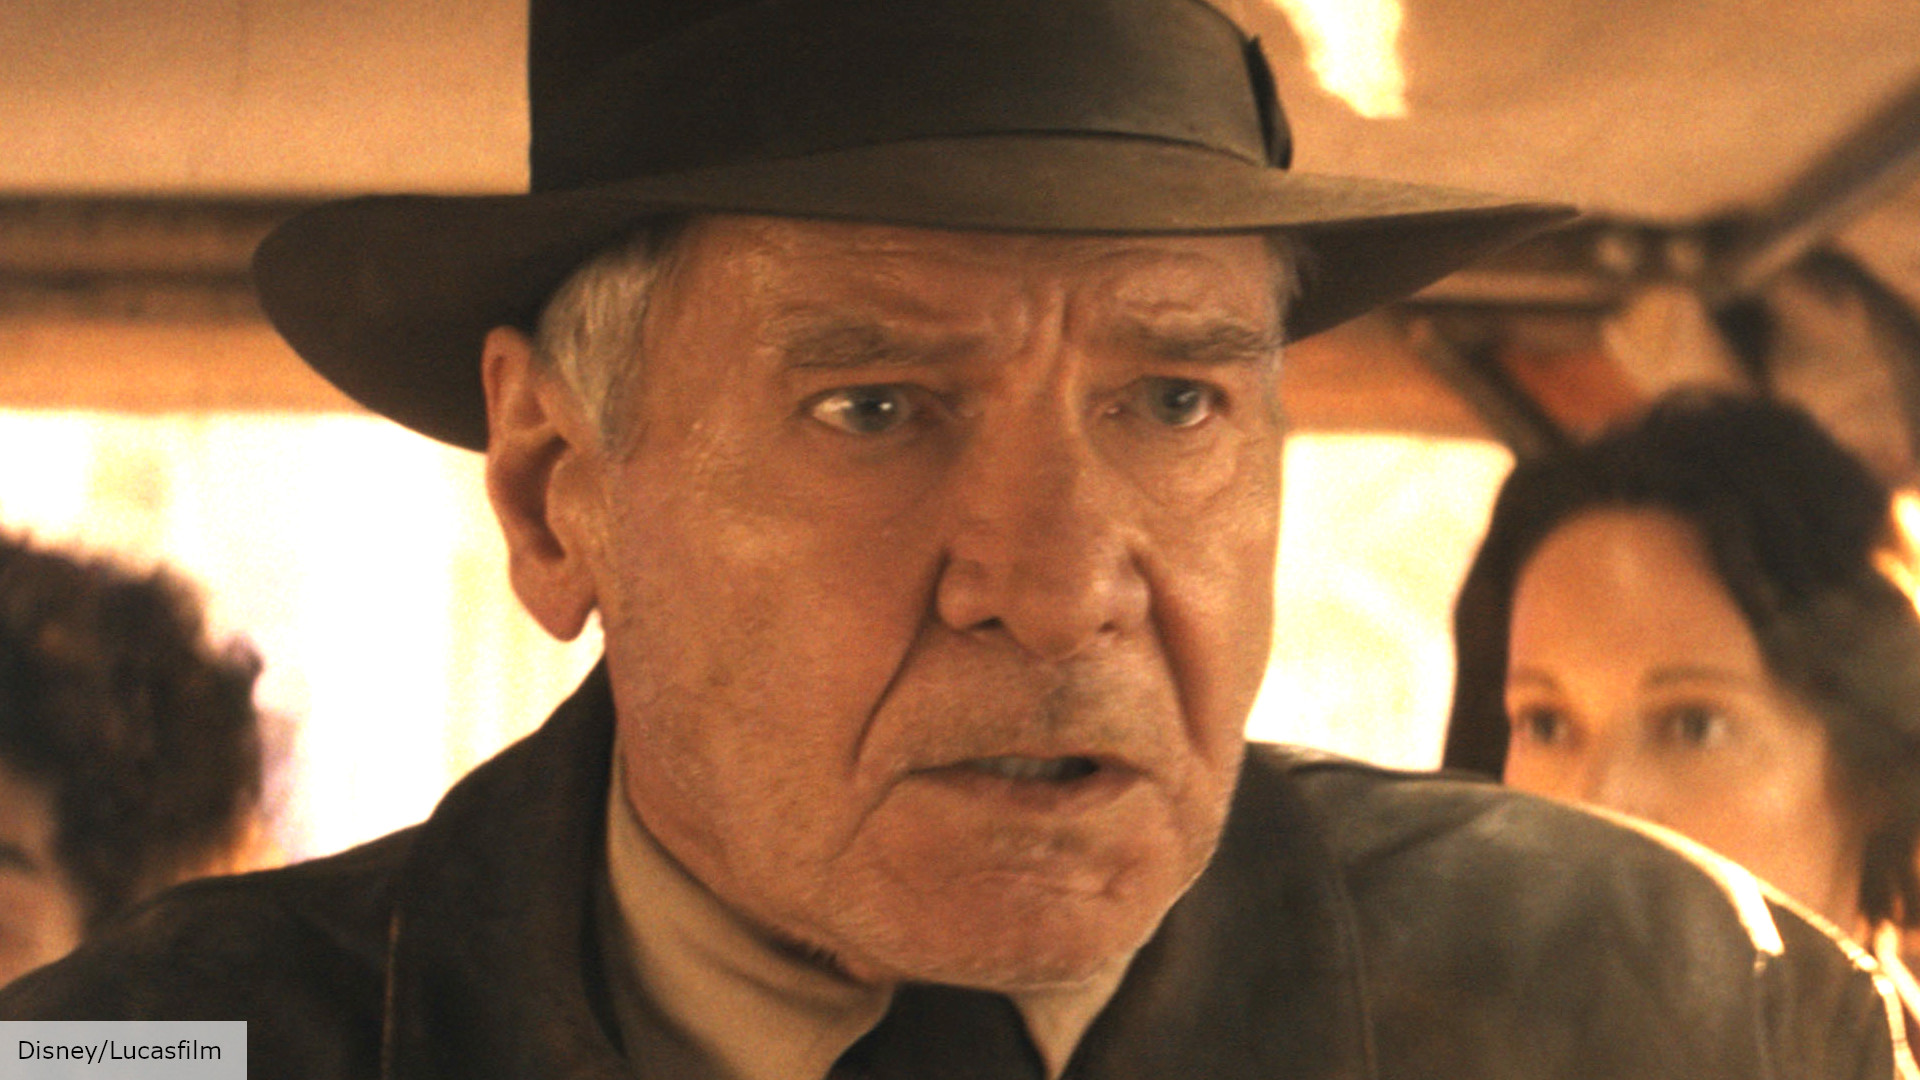 Harrison Ford says goodbye to Indiana Jones in a predictably dry way